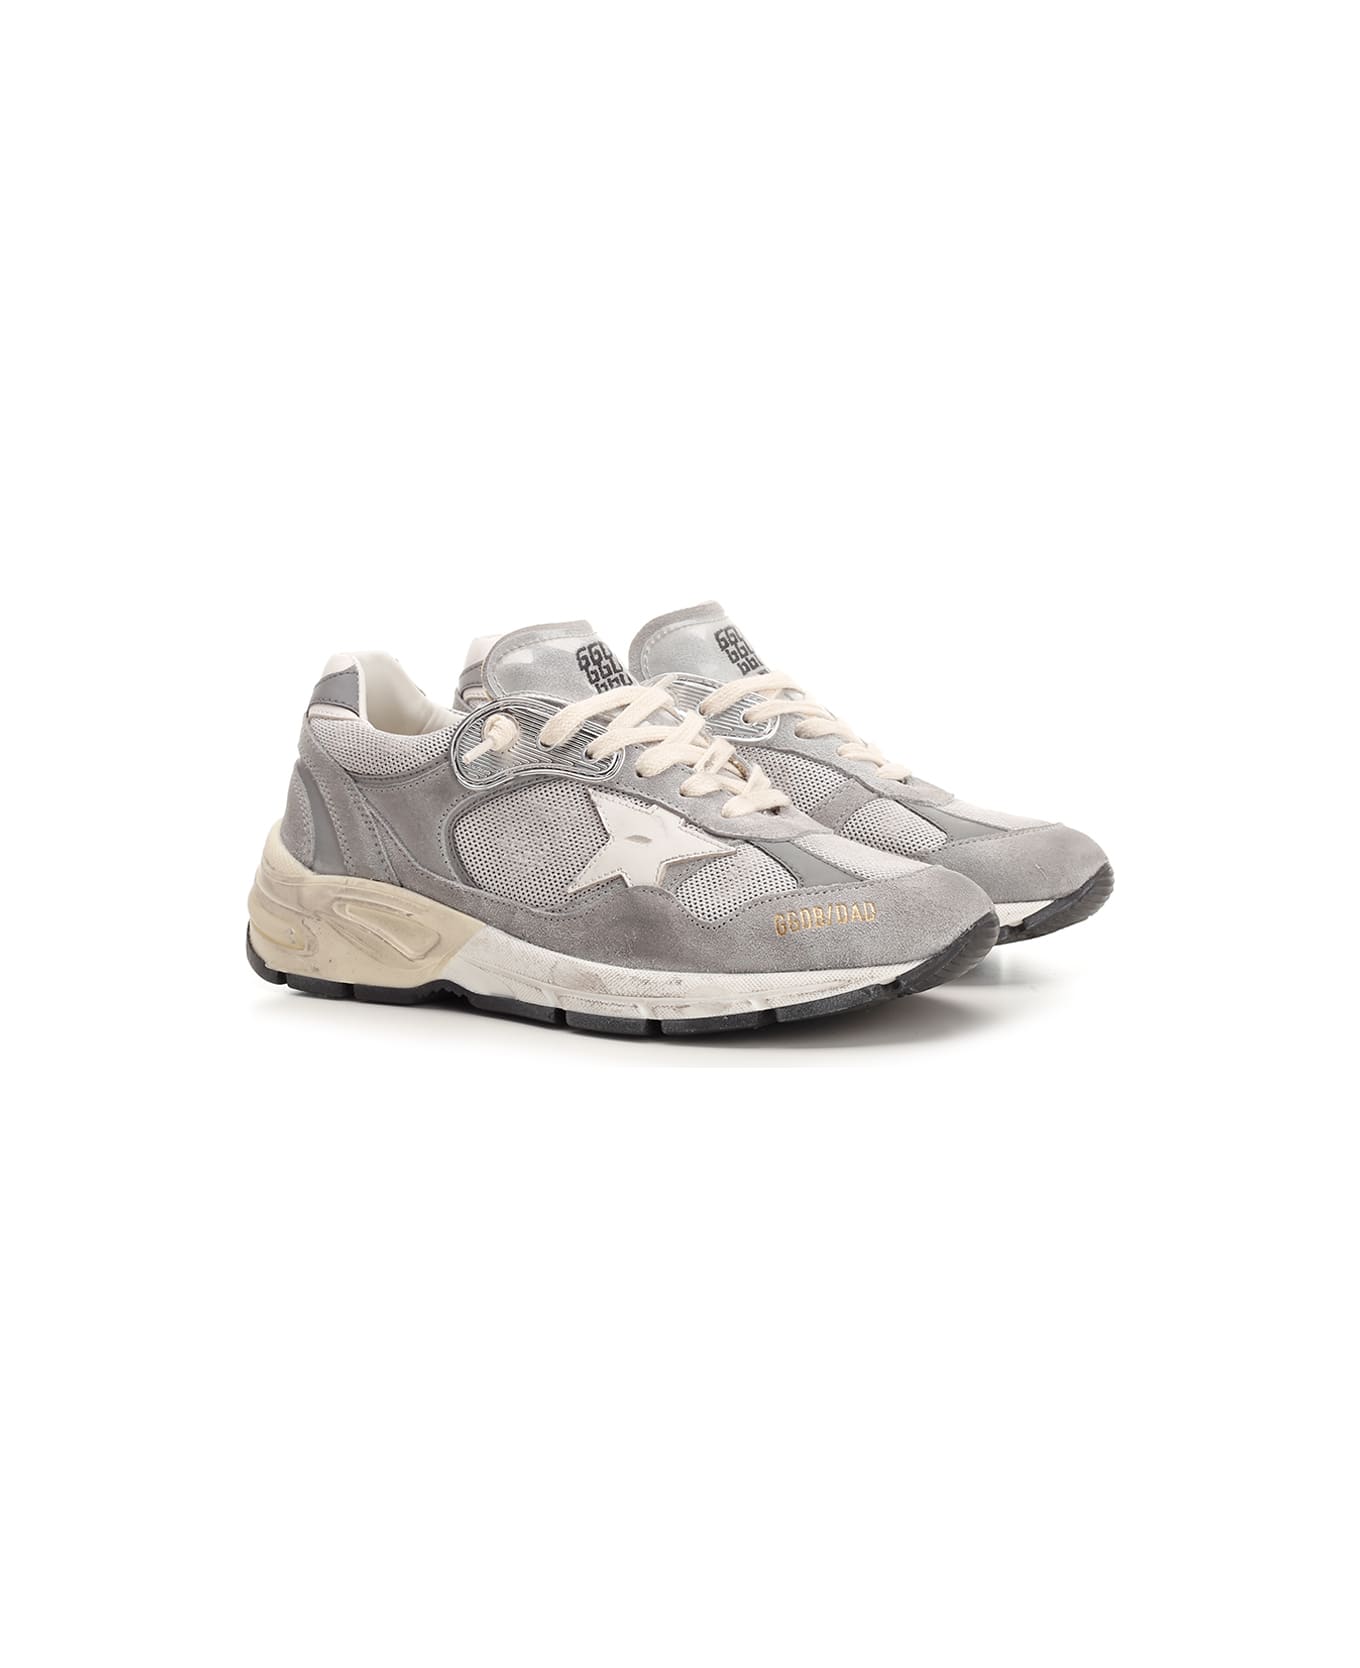 Golden Goose Running Dad Sneakers - Grey/Silver/White